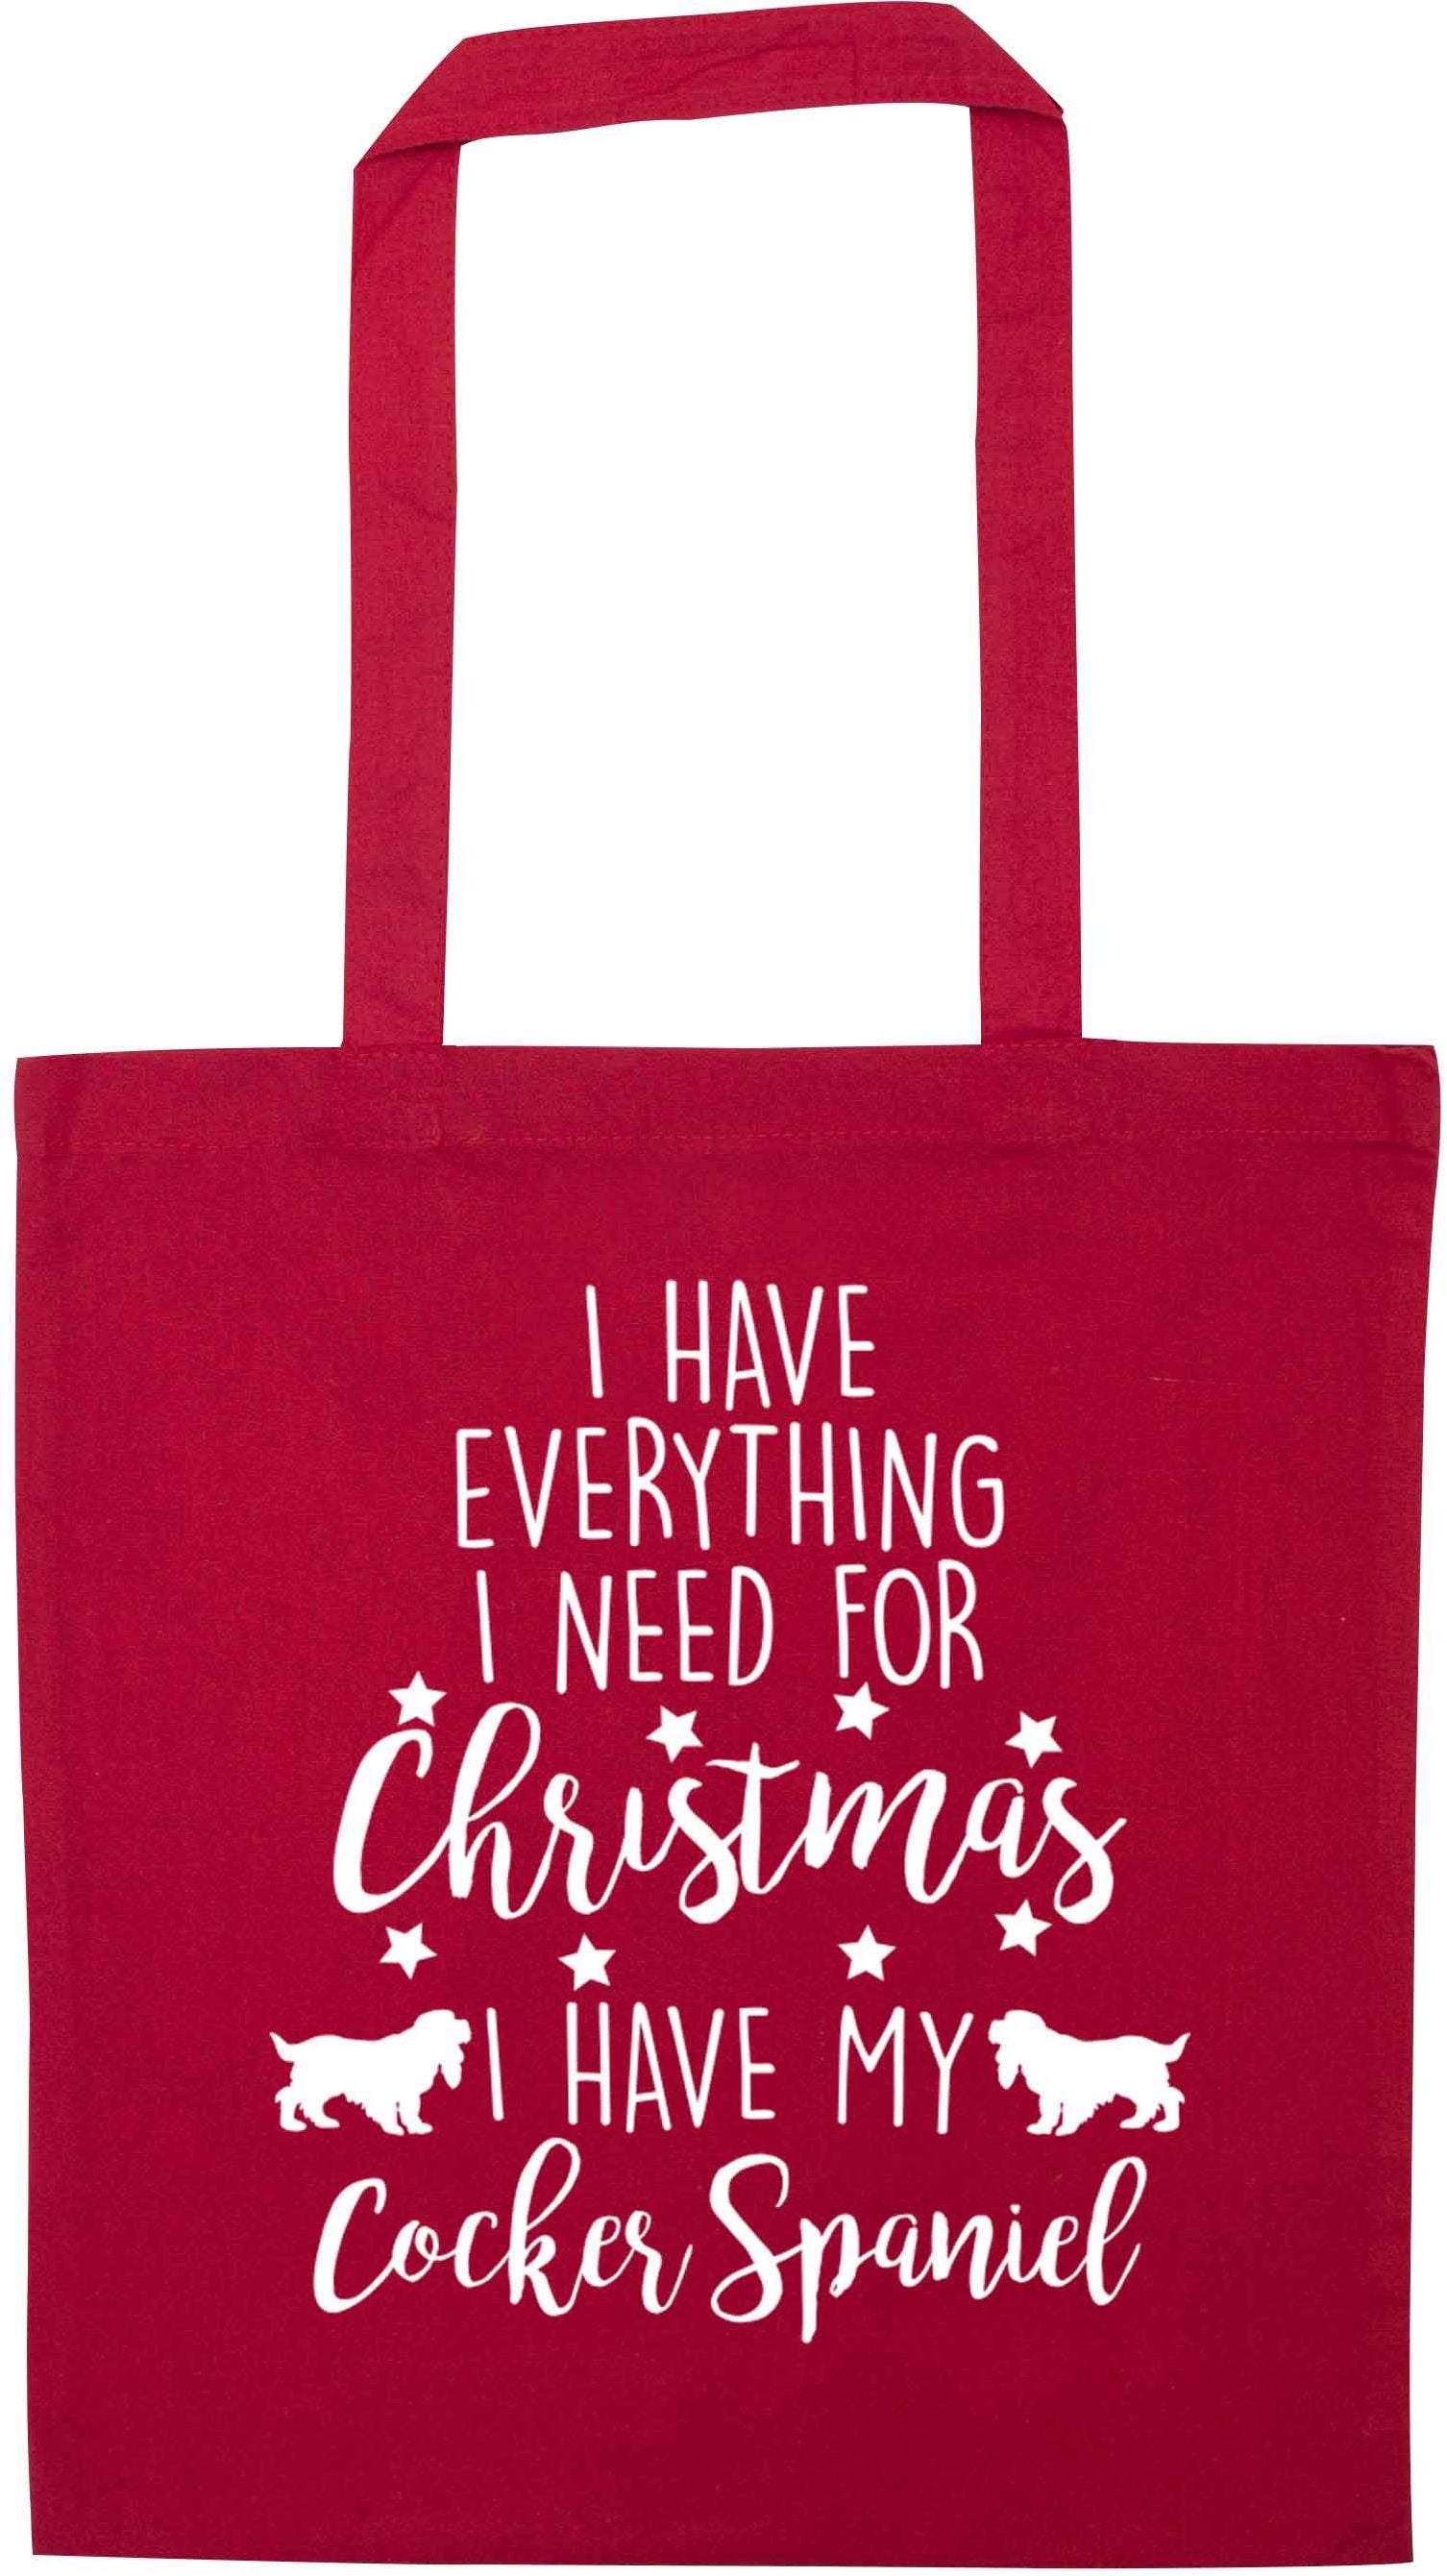 I have everything I need for Christmas I have my cocker spaniel red tote bag